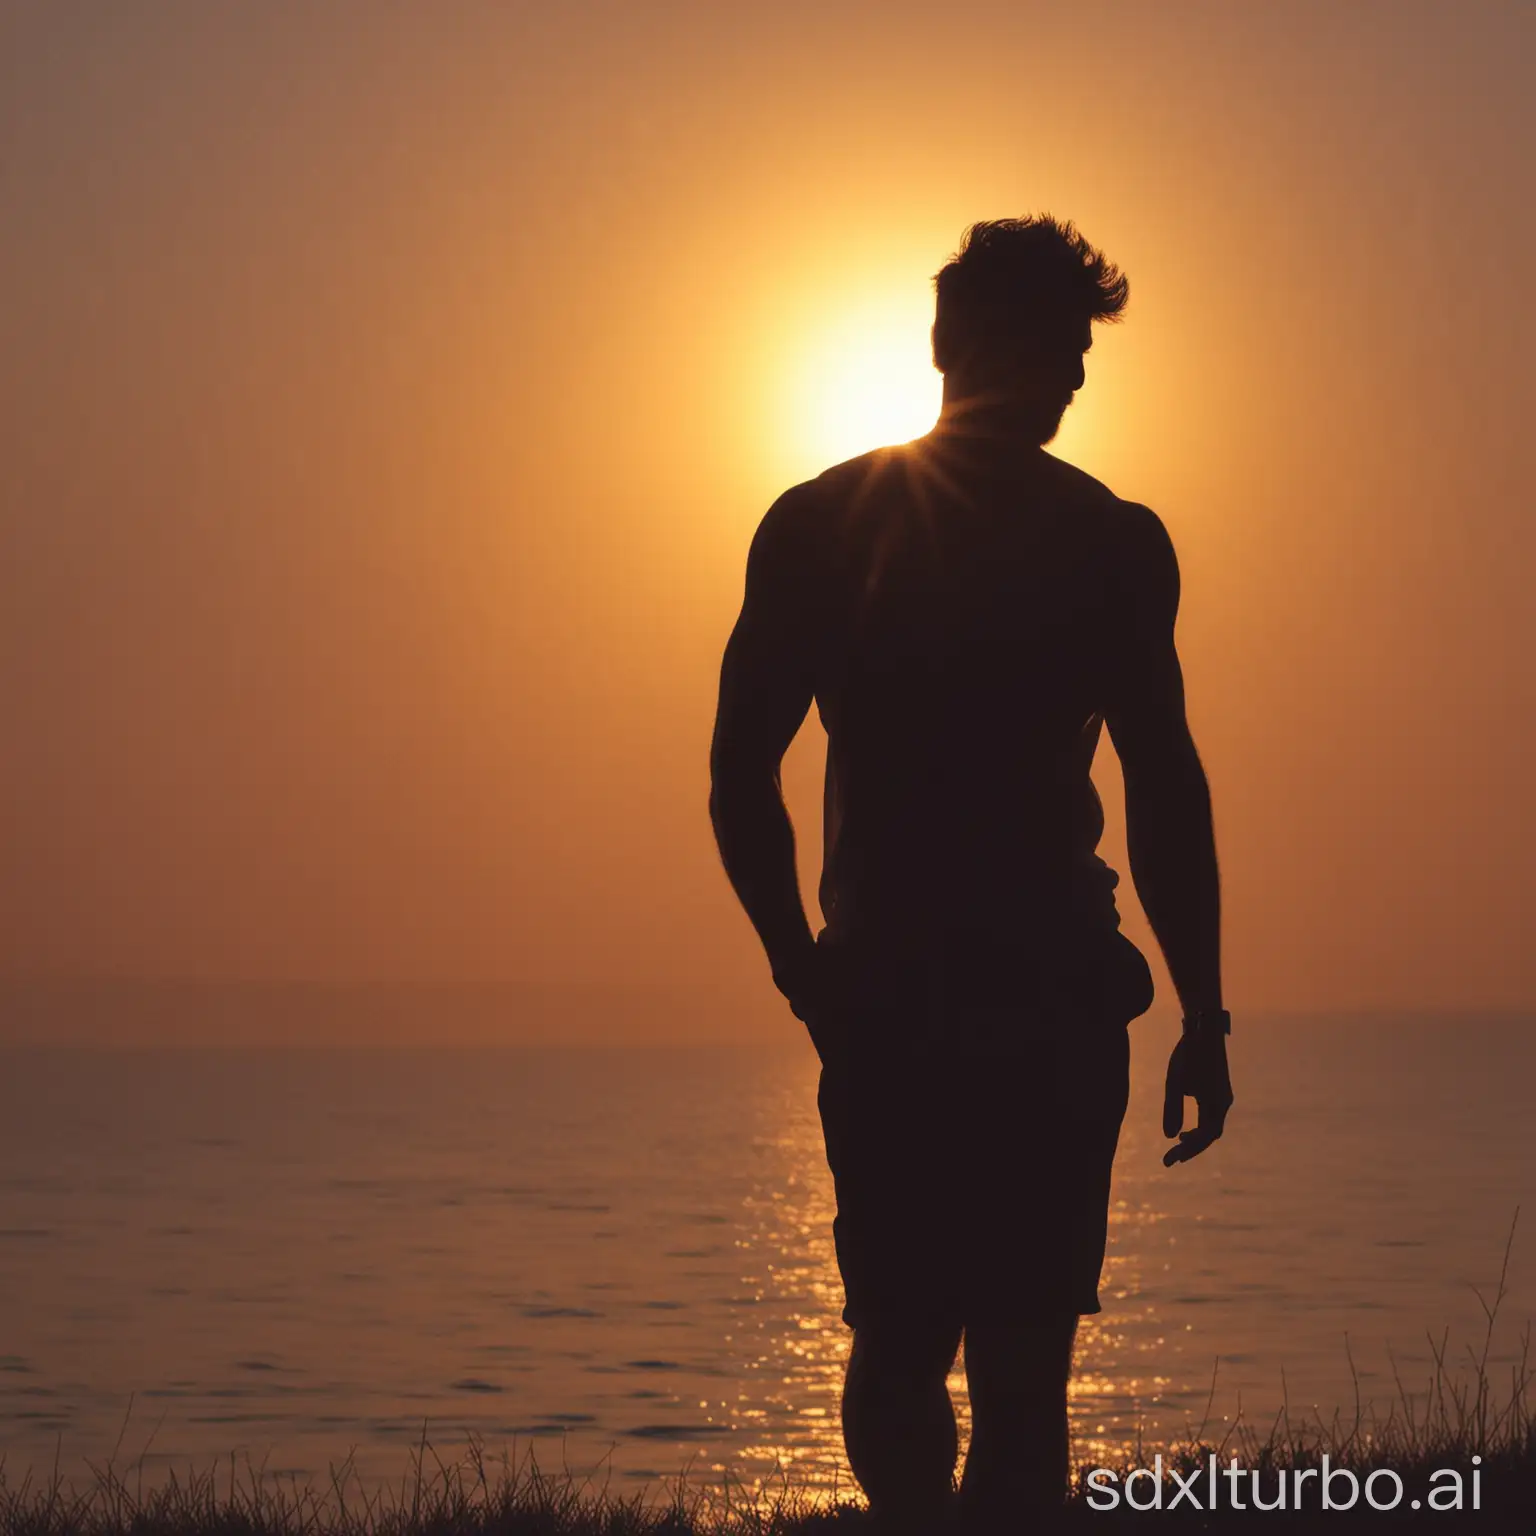 Sunrise-Silhouette-of-a-Handsome-Man